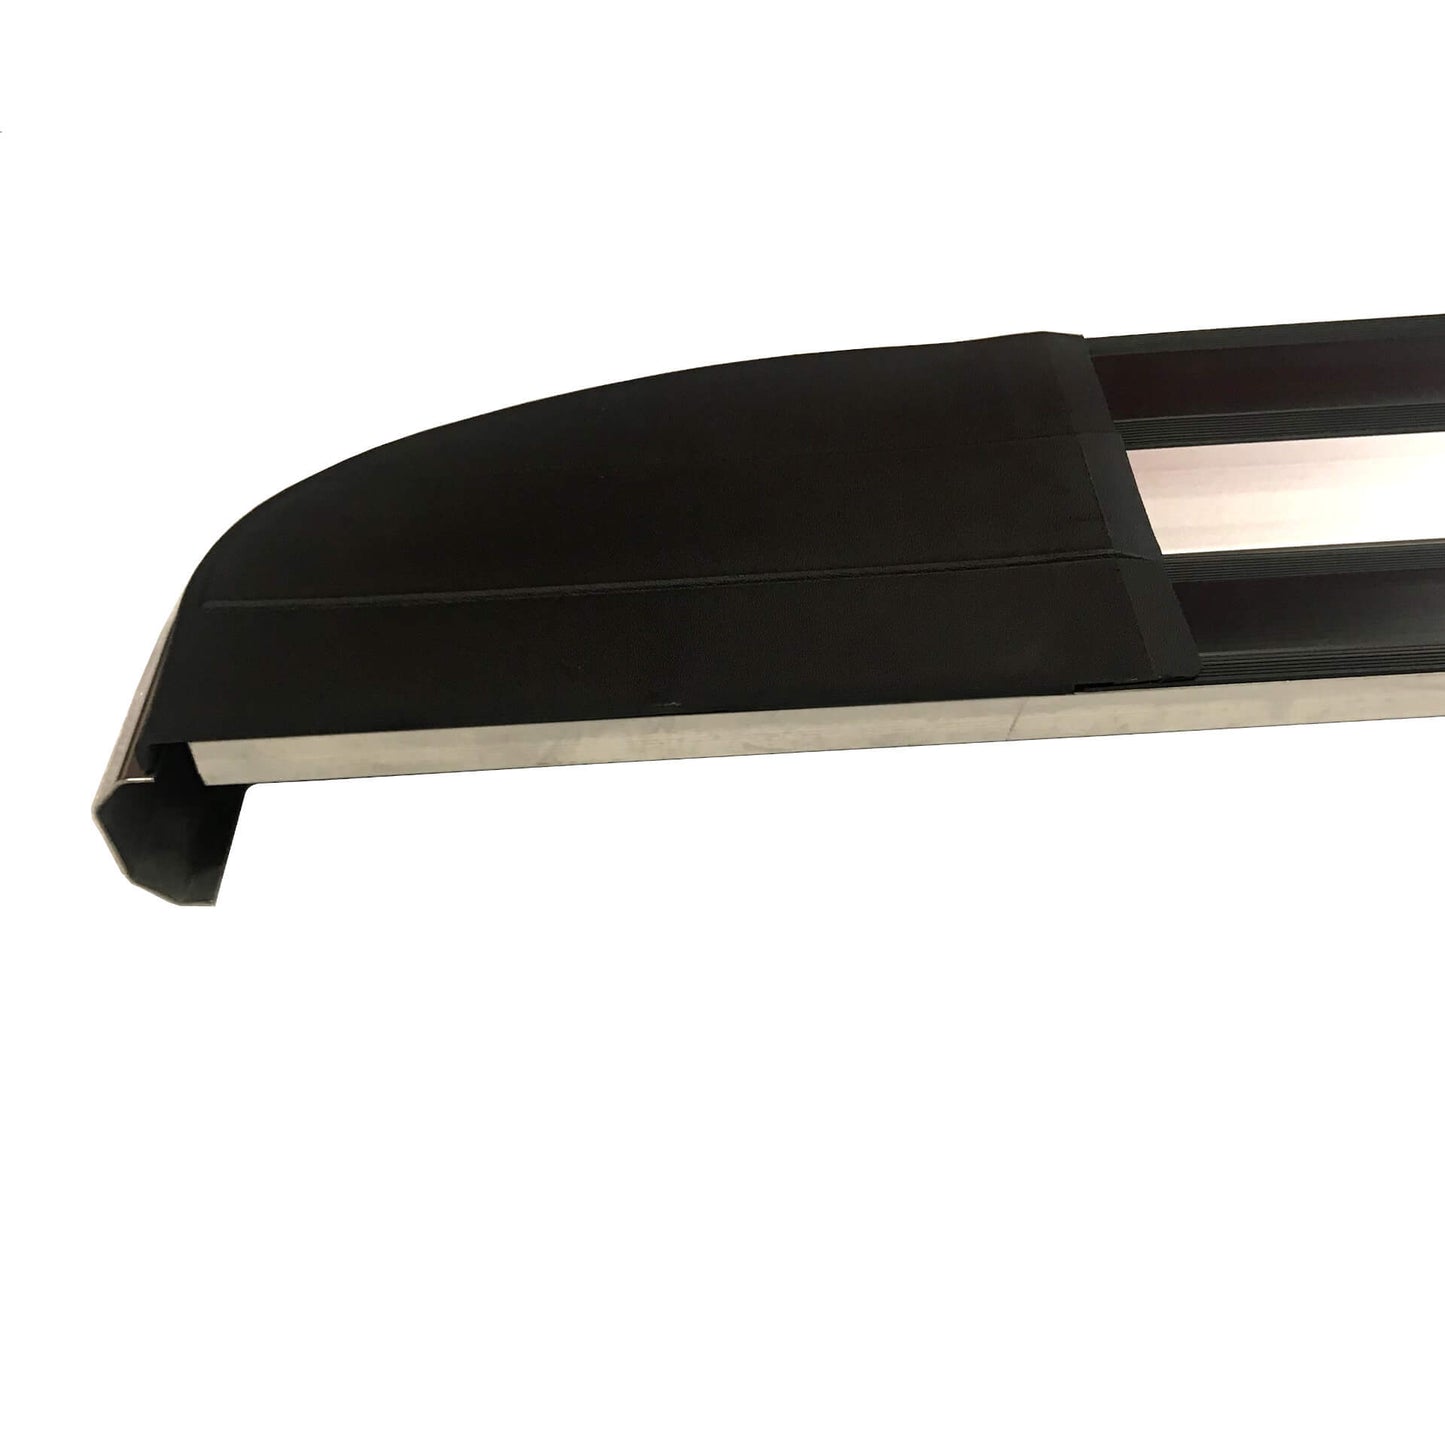 Panther Side Steps Running Boards for Mitsubishi Outlander 2013-2021 -  - sold by Direct4x4